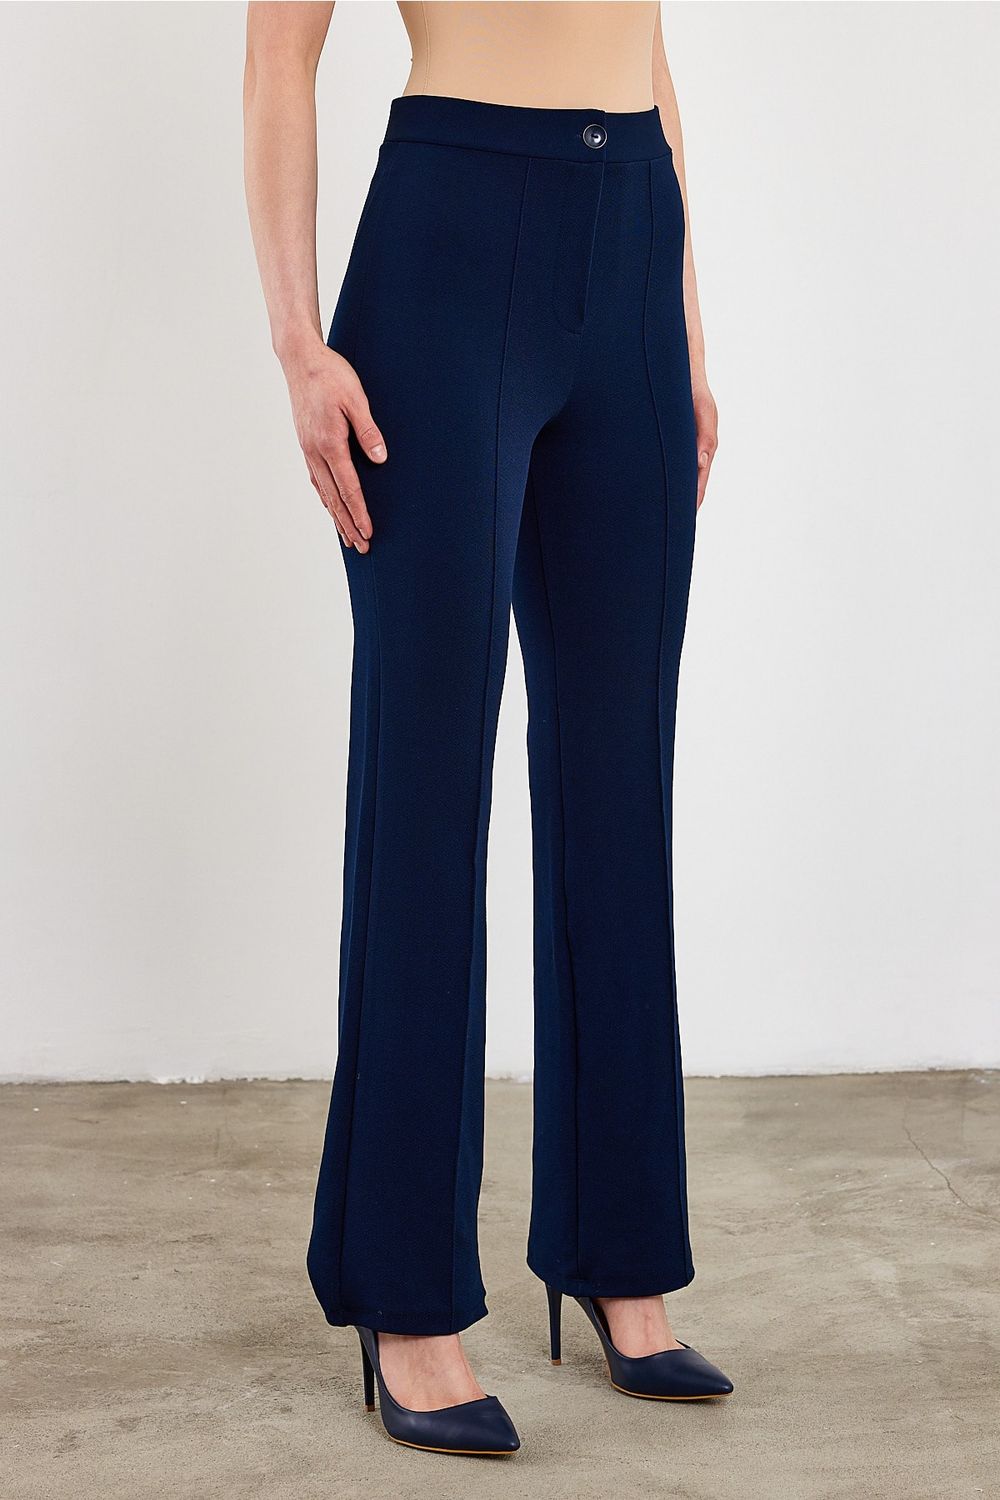 ELIE TAHARI NEW tagged $228 Wide Leg Stone Color Pants Trousers TALL | eBay